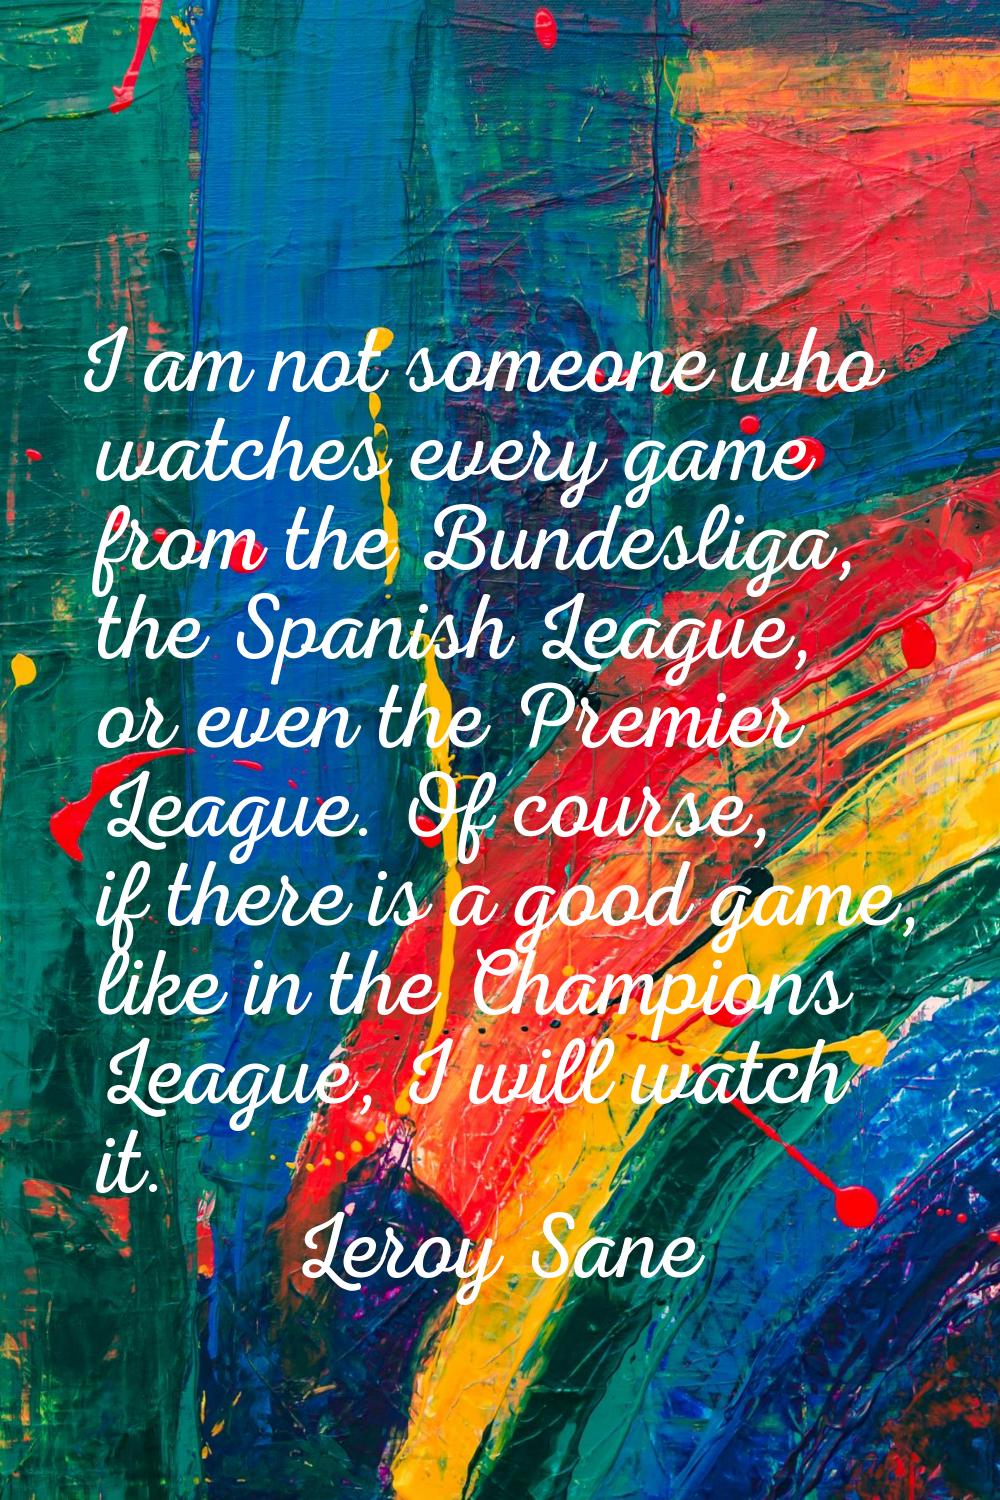 I am not someone who watches every game from the Bundesliga, the Spanish League, or even the Premie